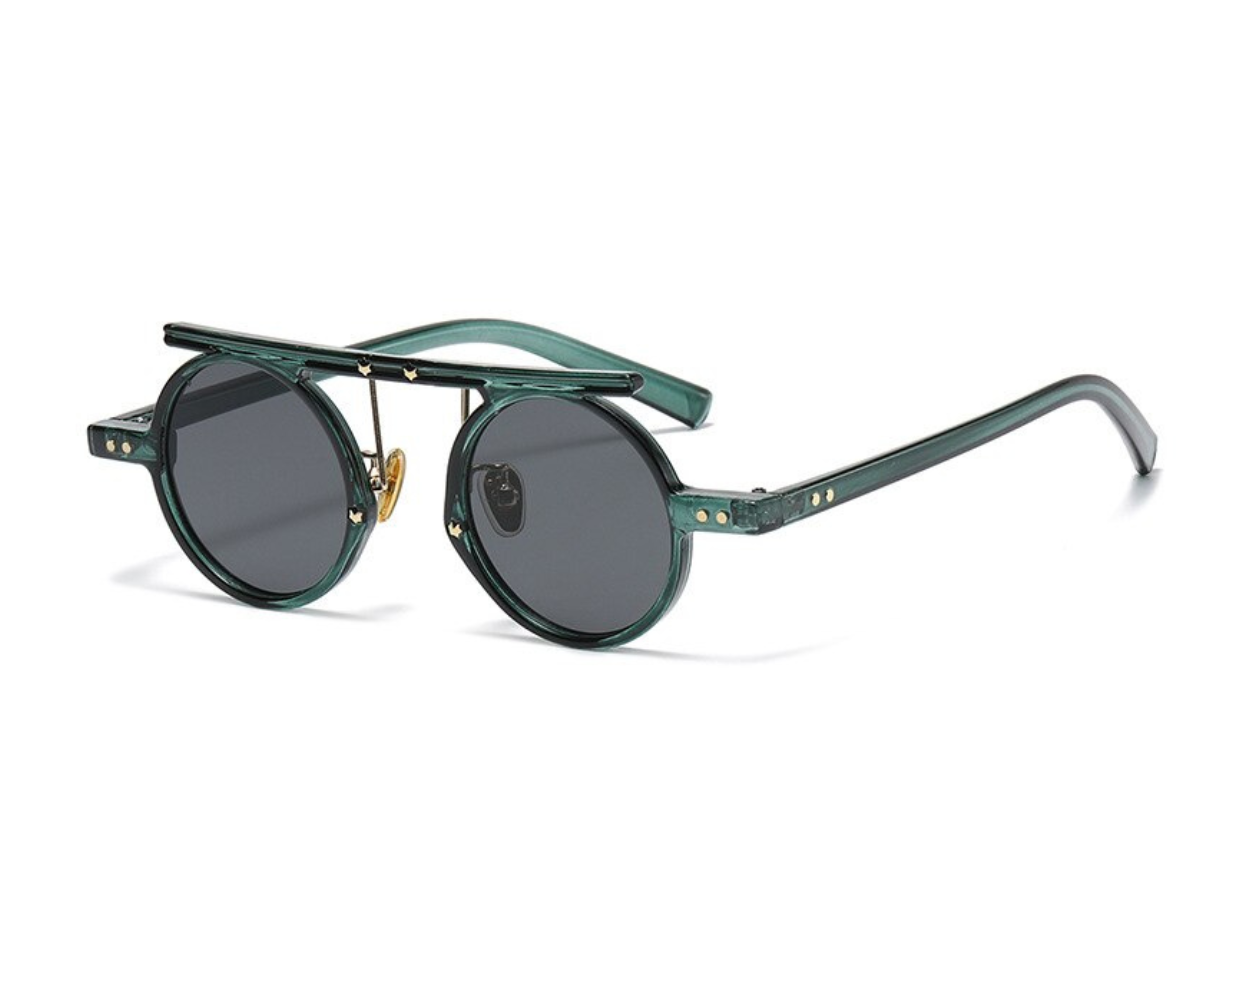 Pagoda Sunglasses - Who Cares Why Not